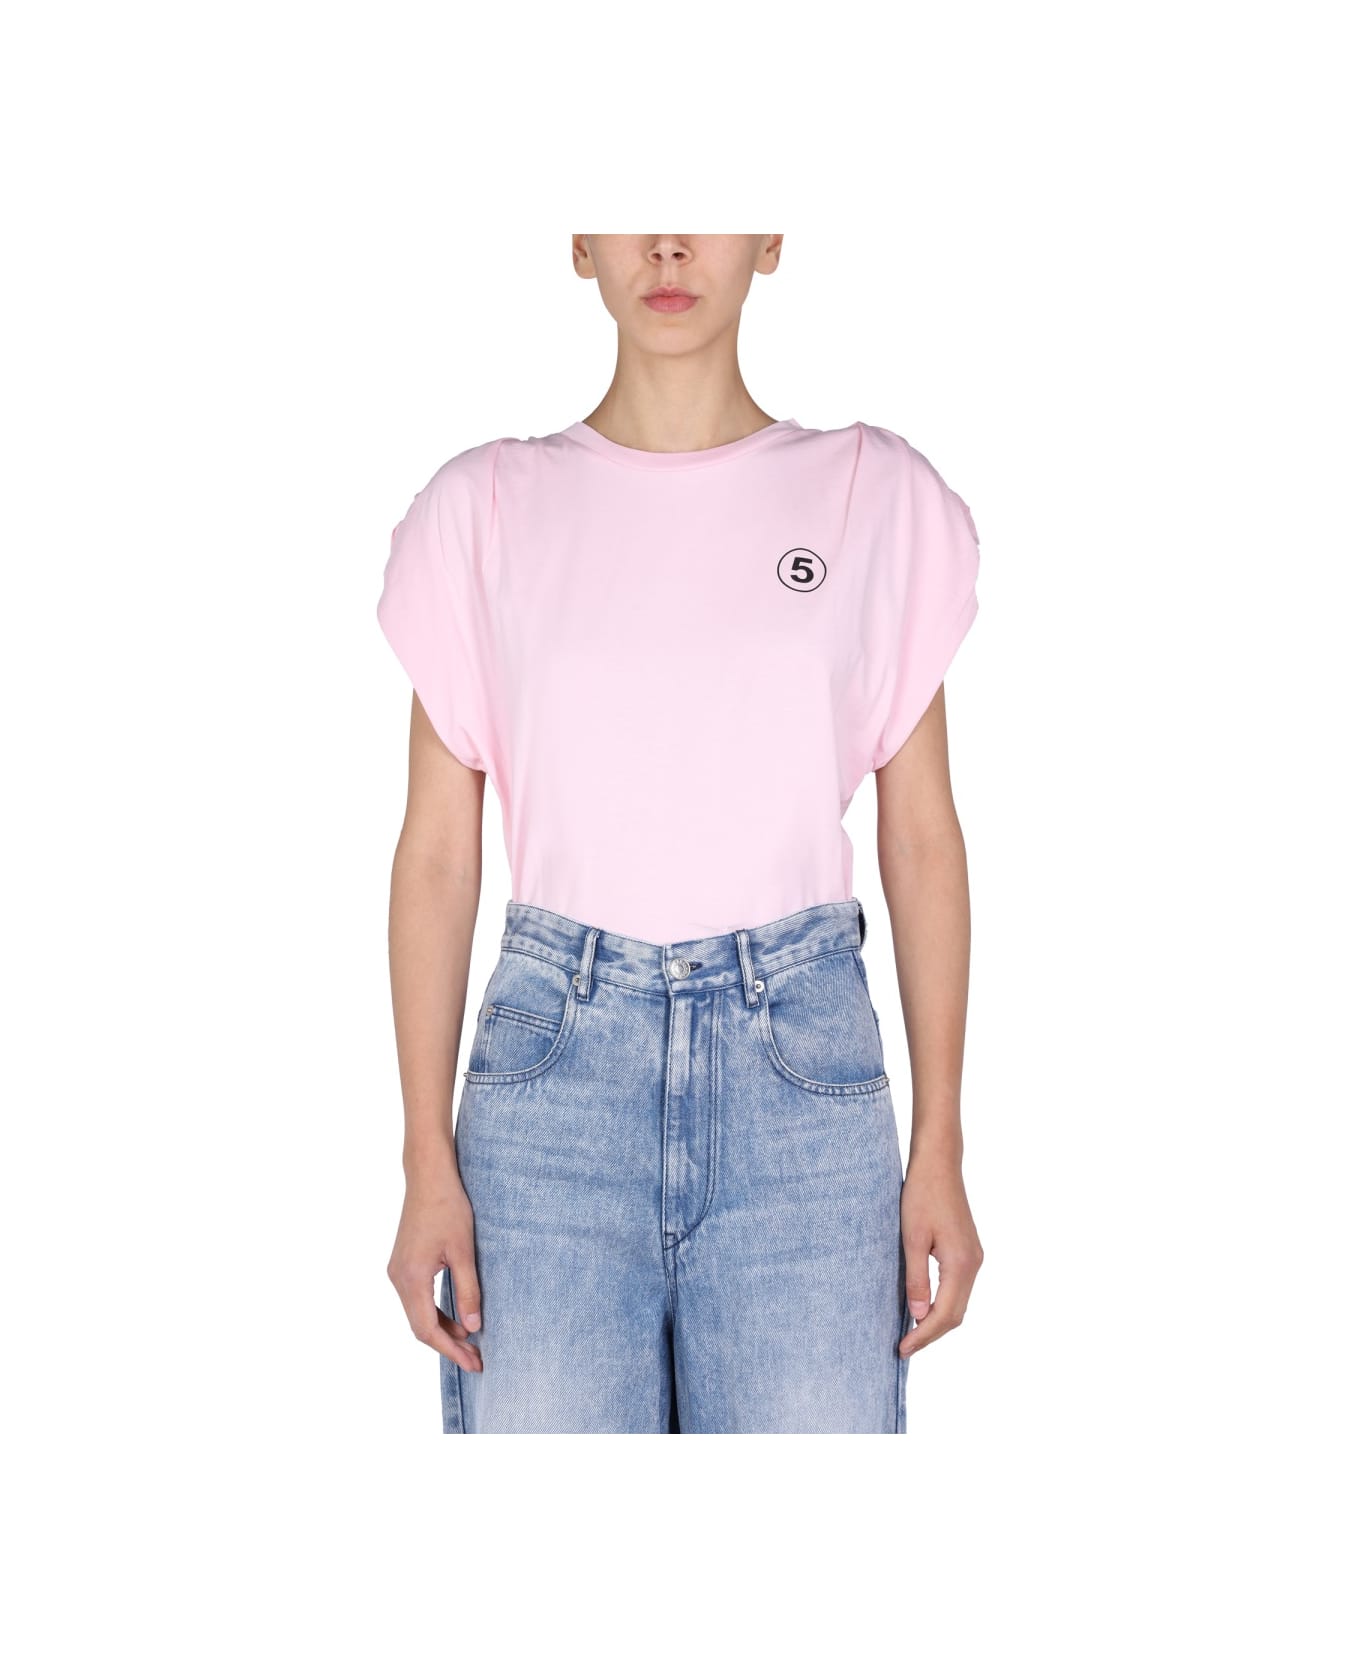 Department Five "hollywood" T-shirt - PINK